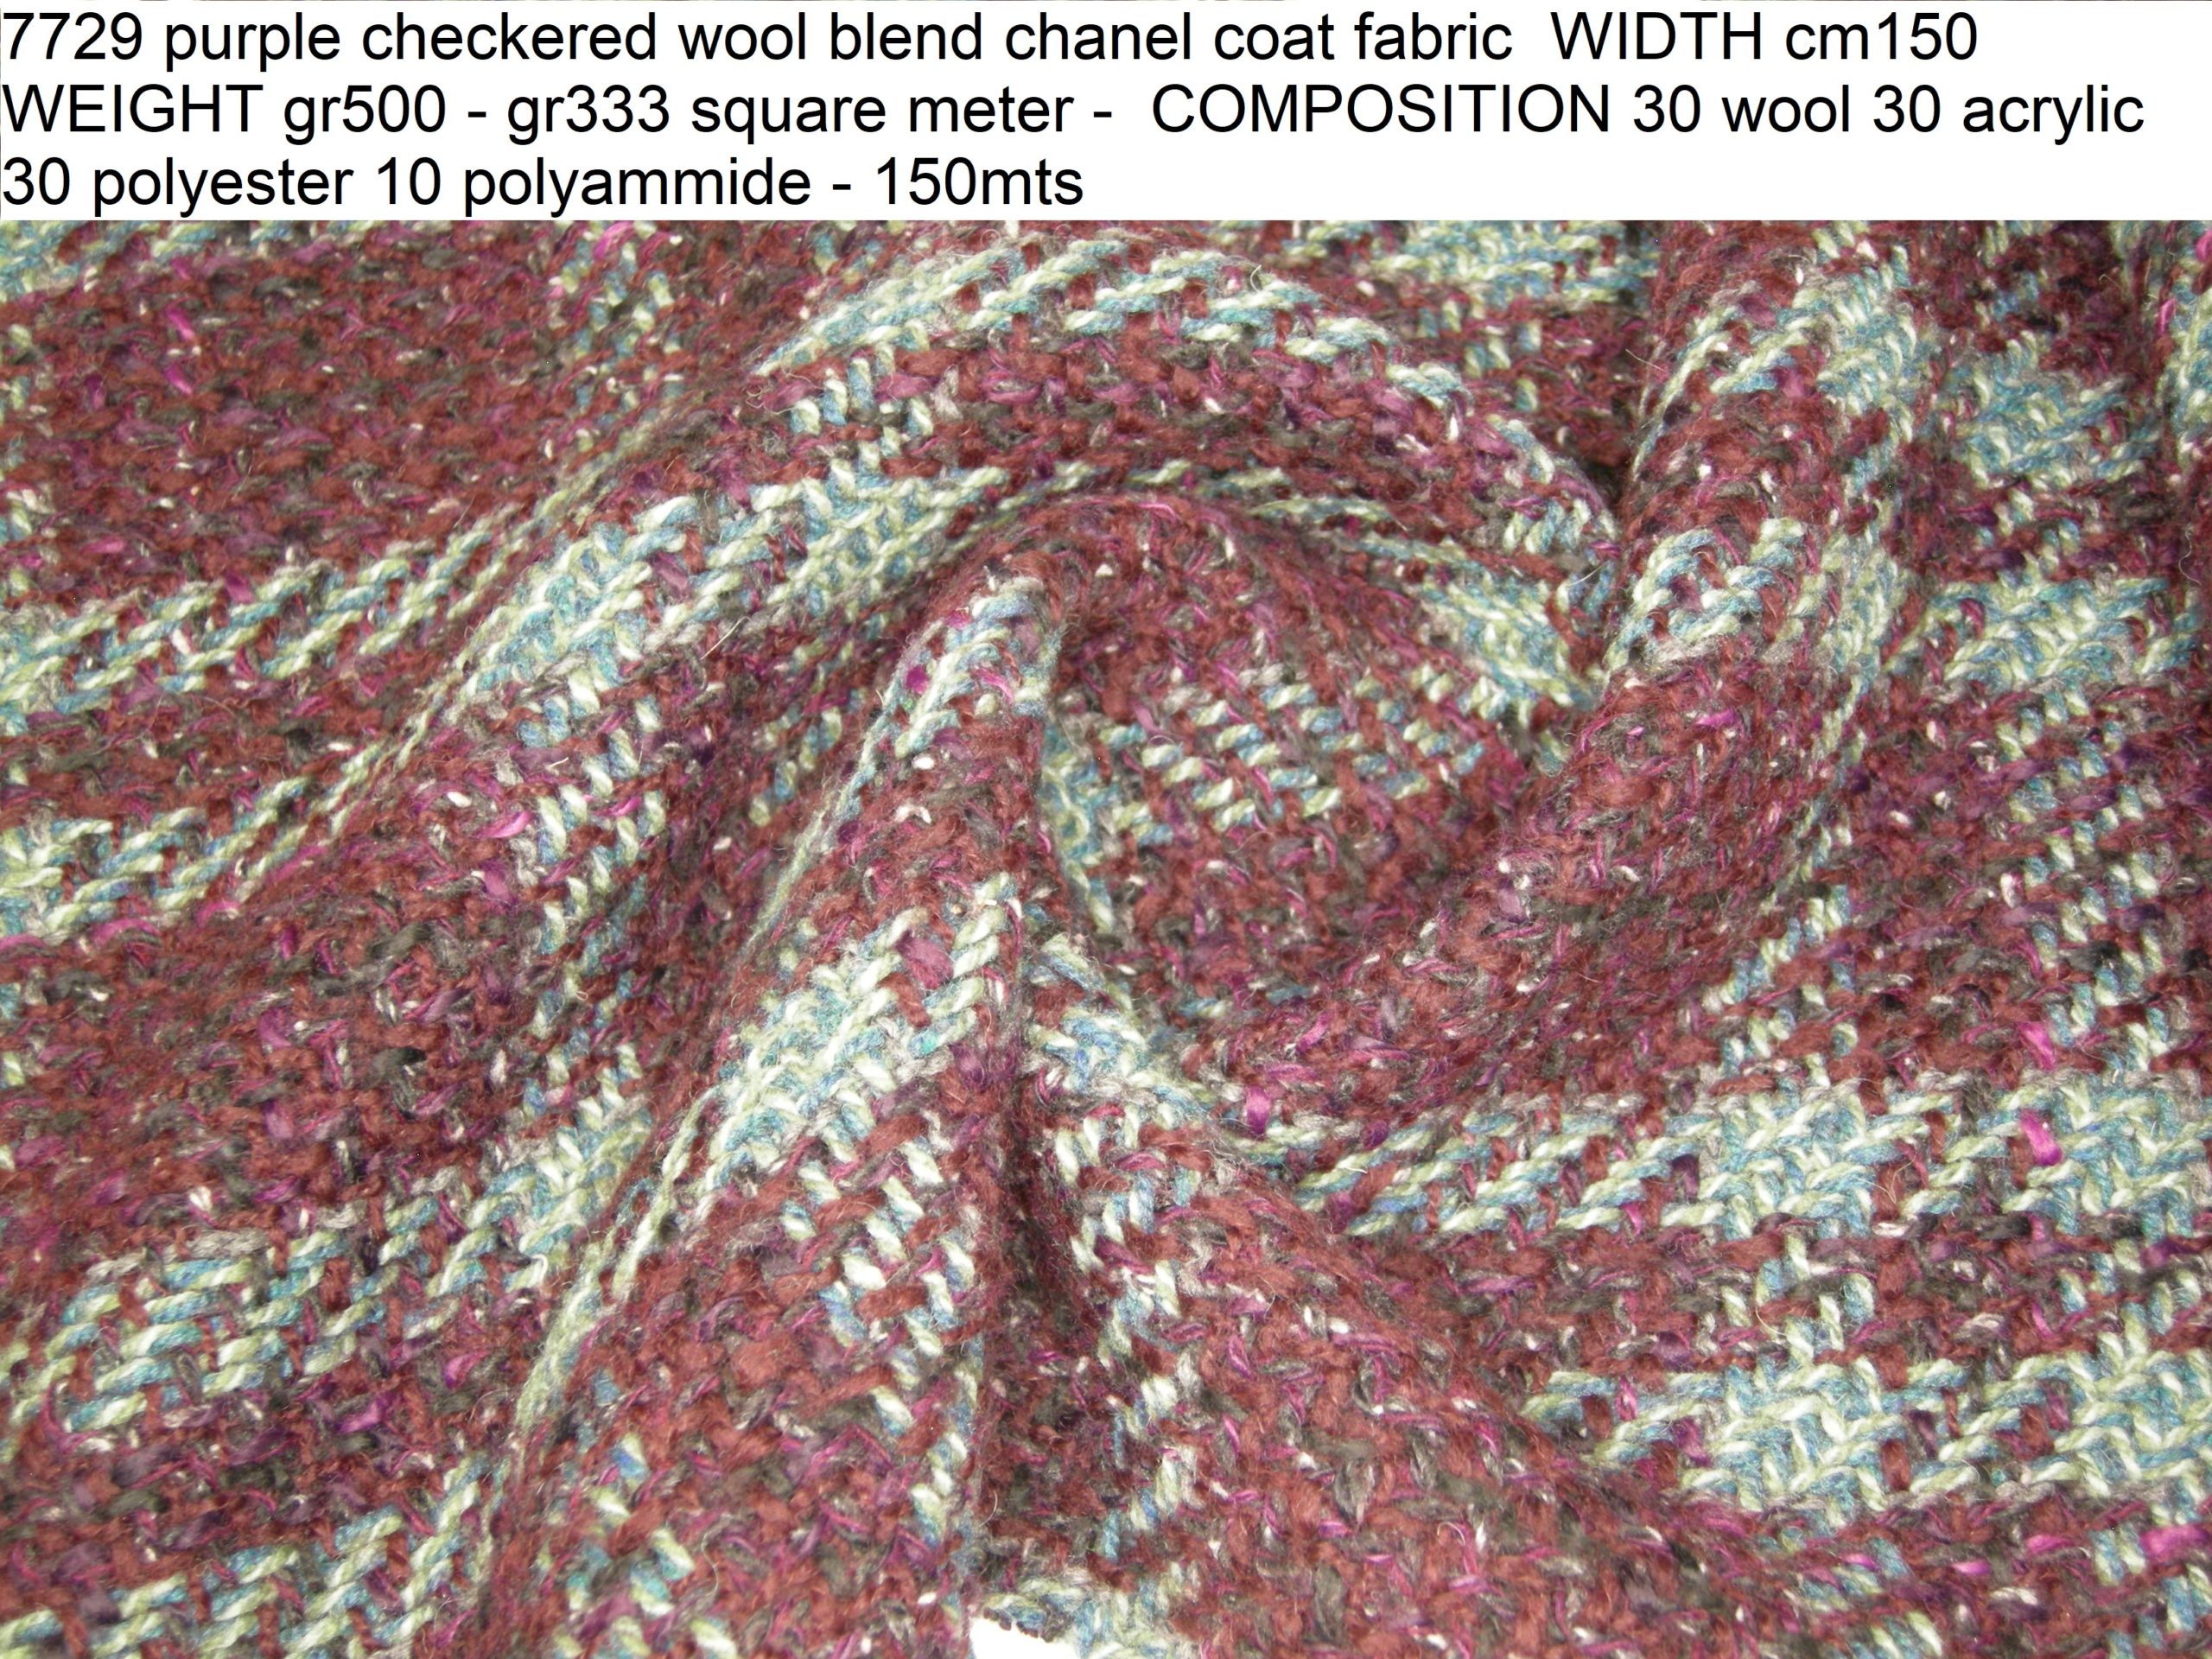 7729 purple checkered wool blend chanel coat fabric WIDTH cm150 WEIGHT gr500 - gr333 square meter - COMPOSITION 30 wool 30 acrylic 30 polyester 10 polyammide - 150mts